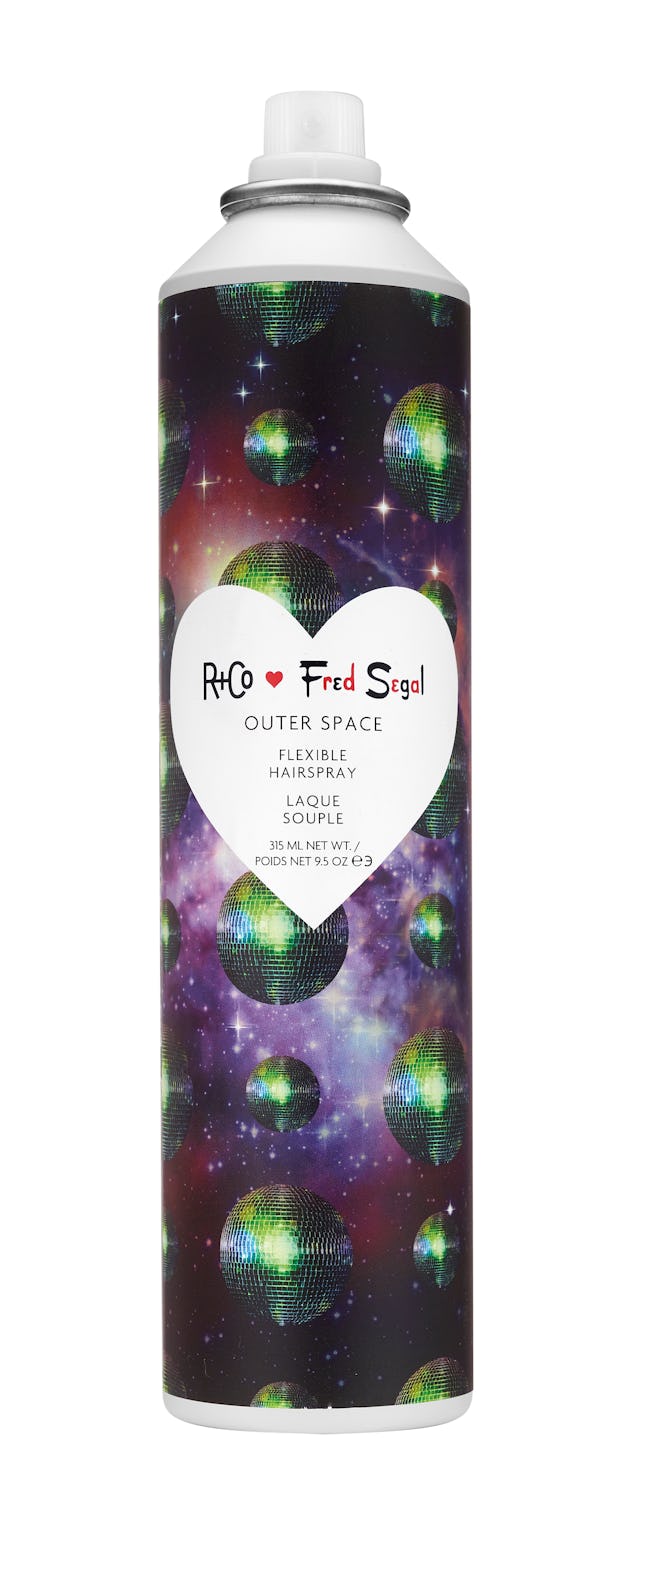 R+Co ♥ Fred Segal OUTER SPACE Flexible Hairspray